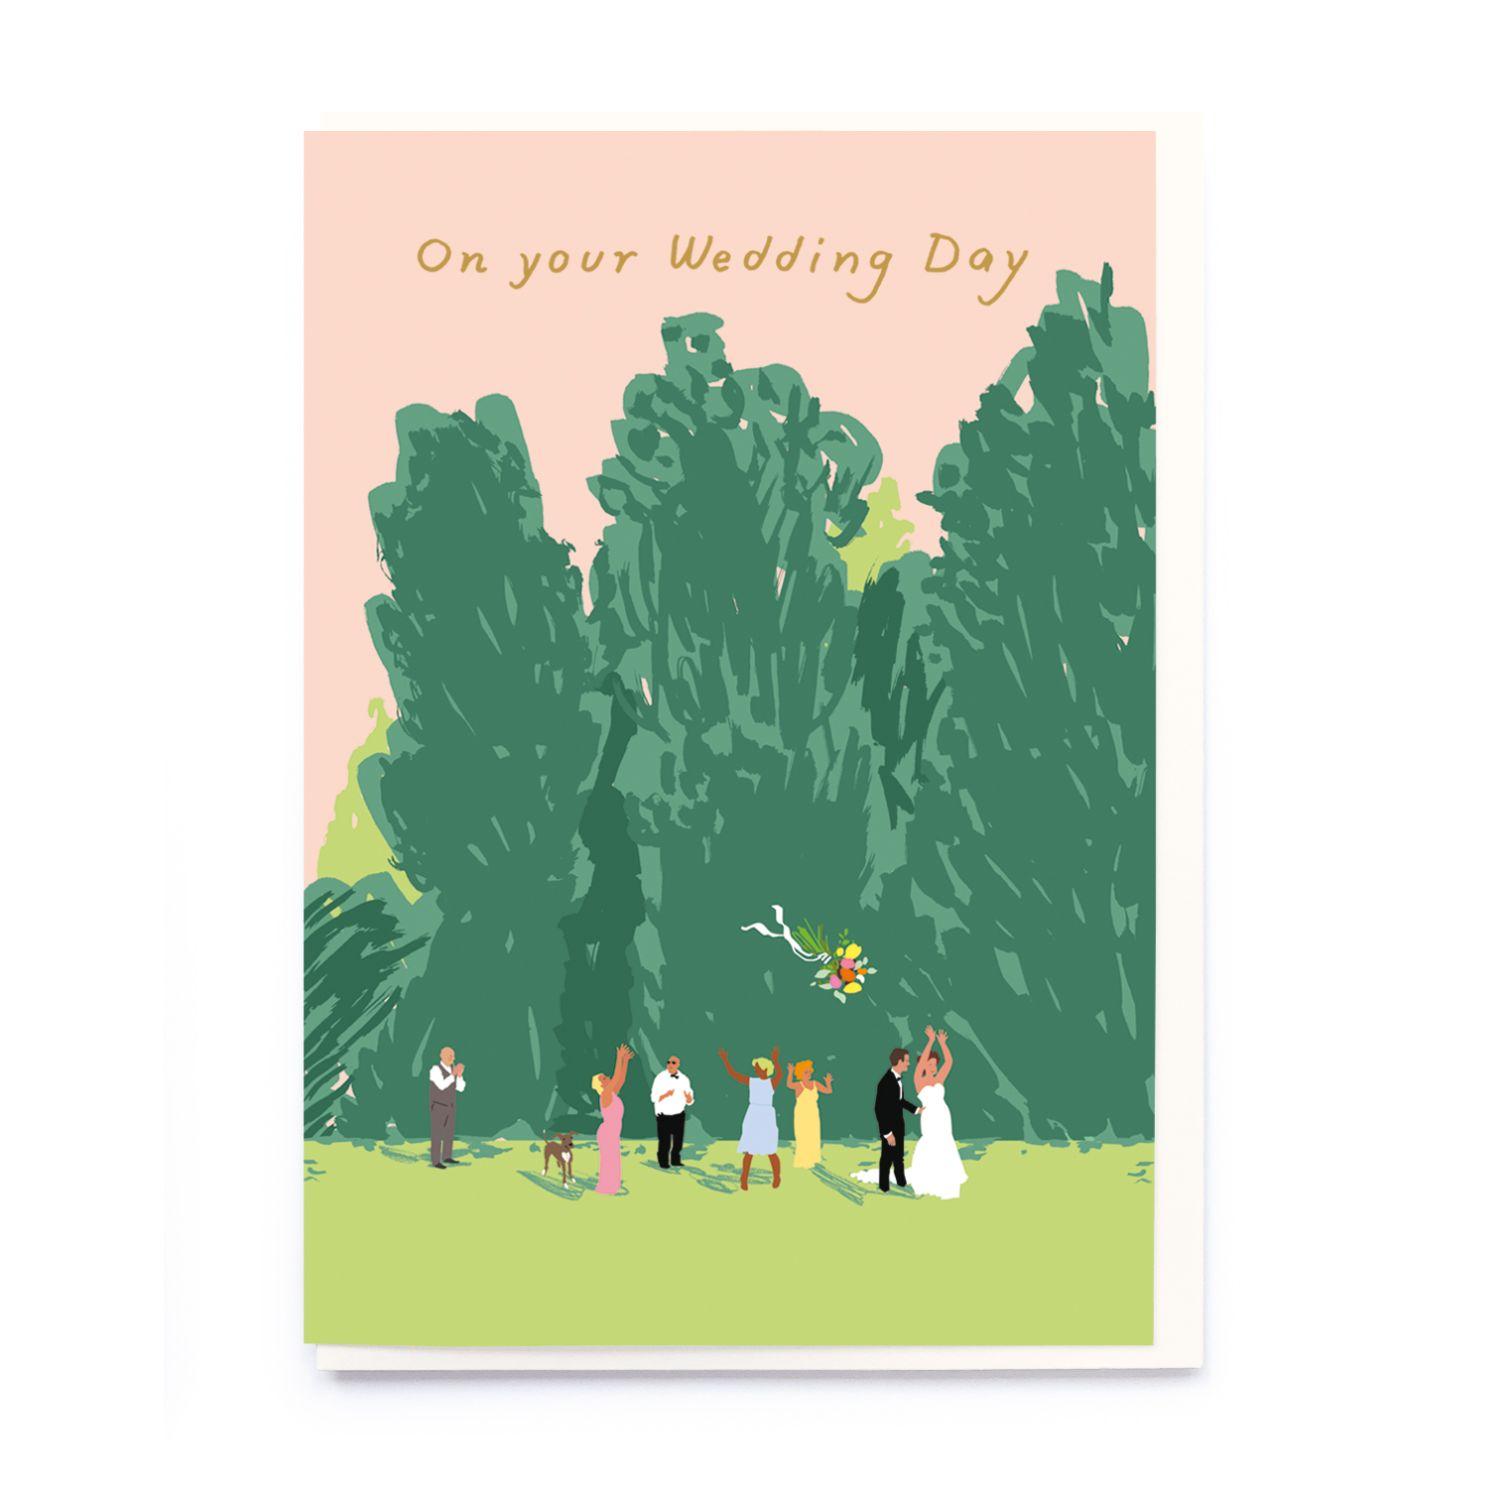 on your wedding day card by Noi Publishing